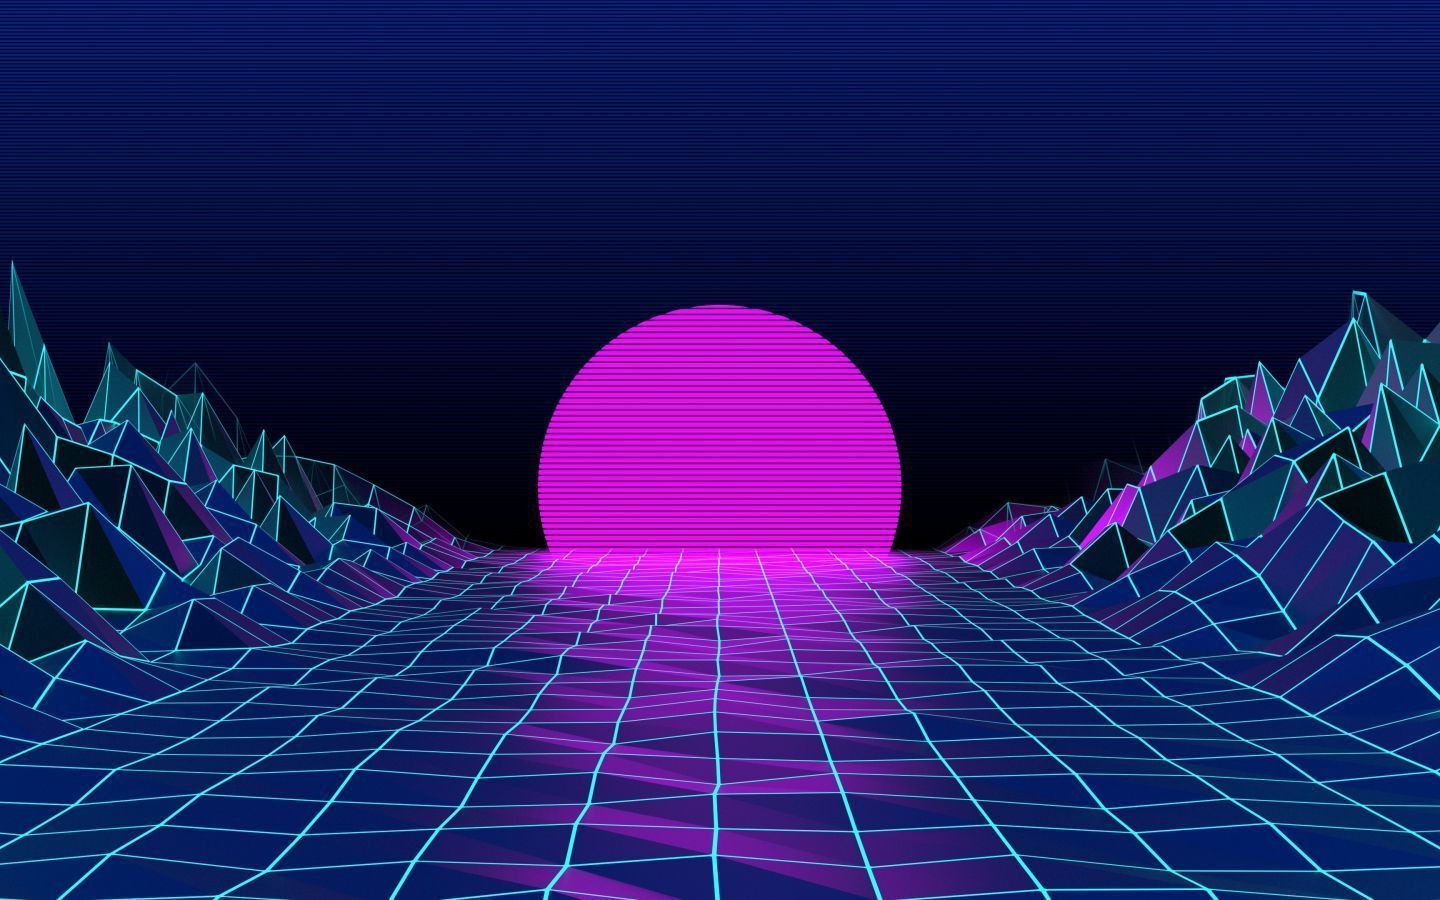 A pink and blue synthwave sunset with a grid landscape - 1440x900